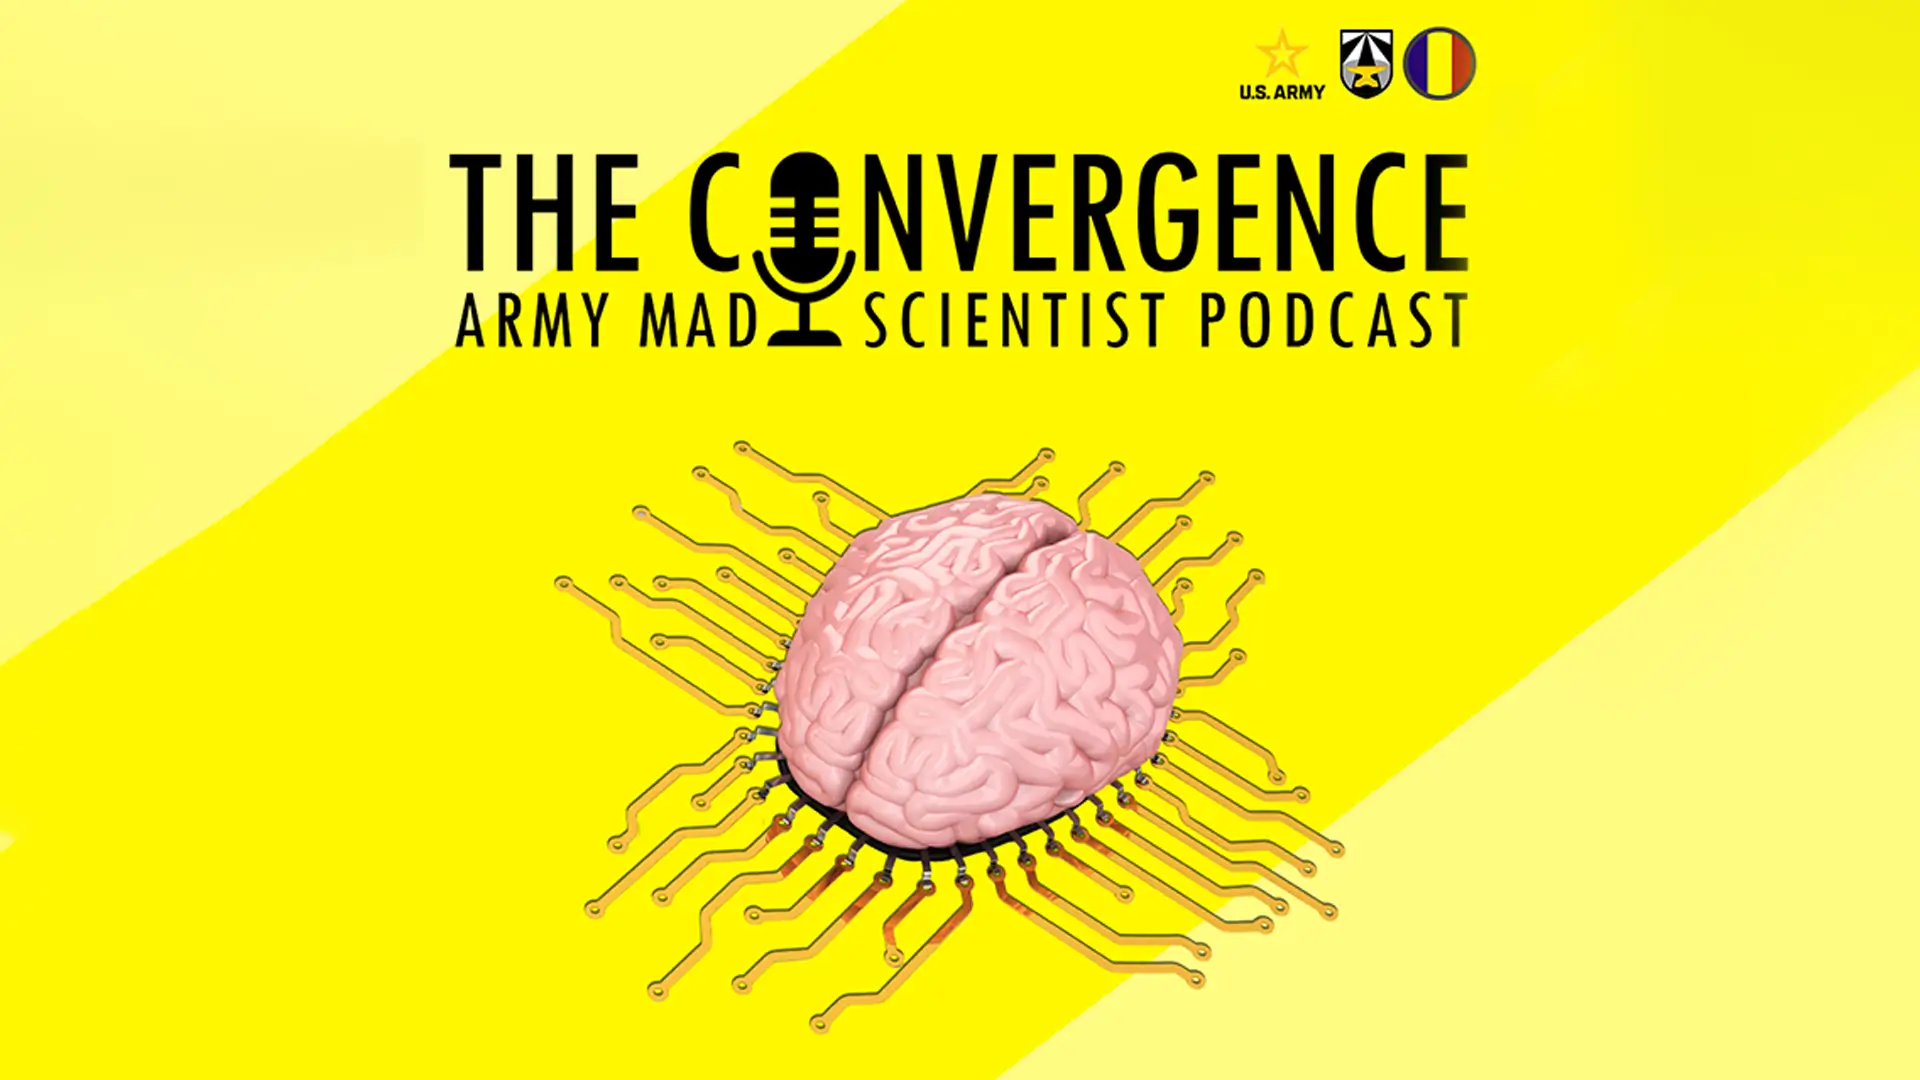 The Convergence podcast logo with yellow background